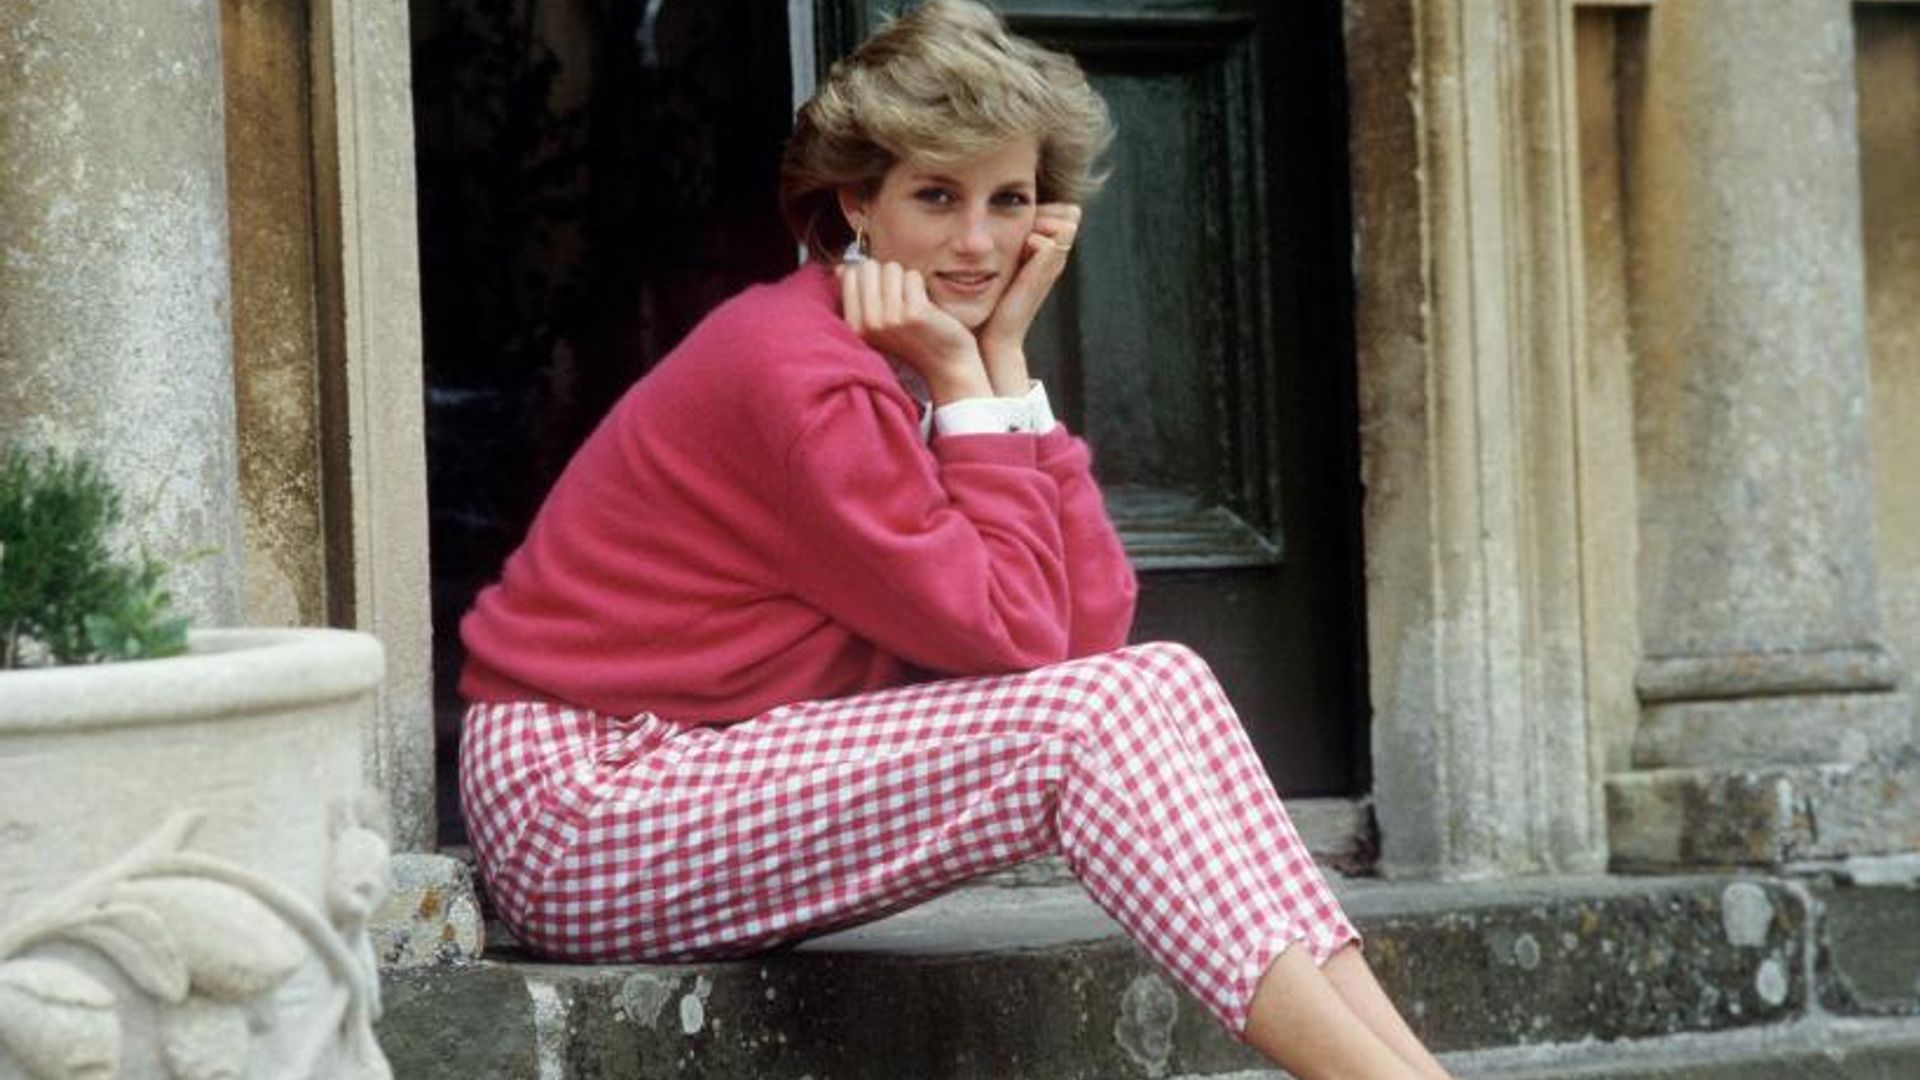 Princess Diana's chef opens up about her battle with bulimia: 'I knew something wasn't right'